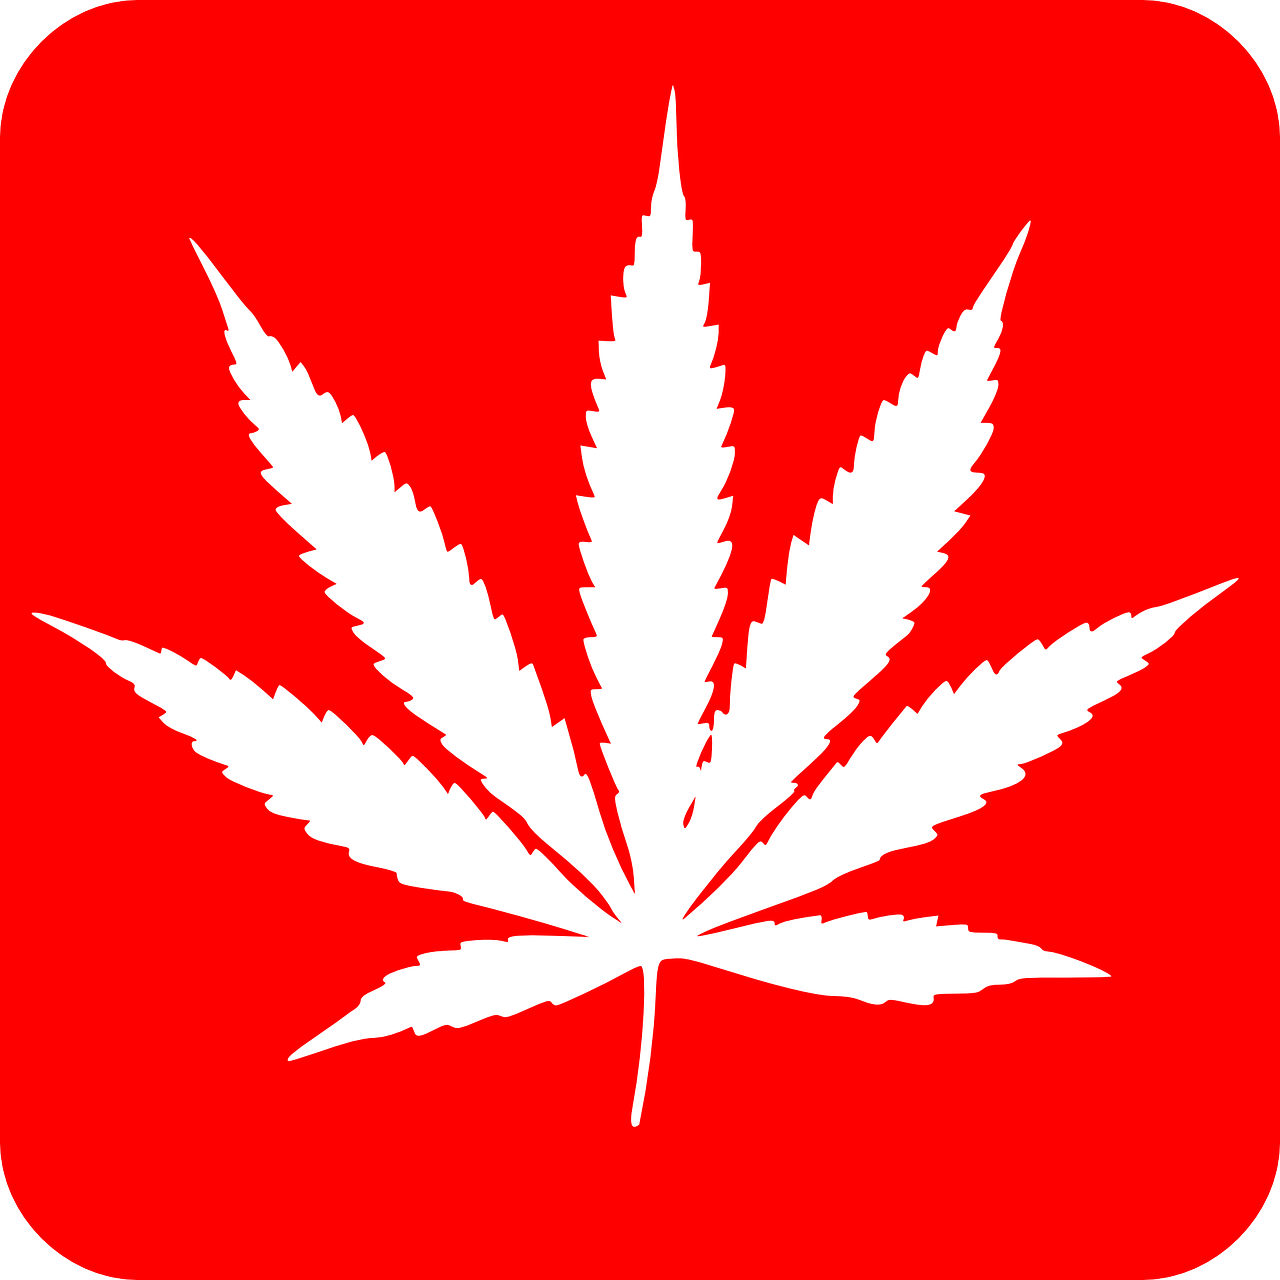 a white marijuana leaf on a red background, inspired by Mary Jane Begin, svg vector art, icon, 2013, shenzhen